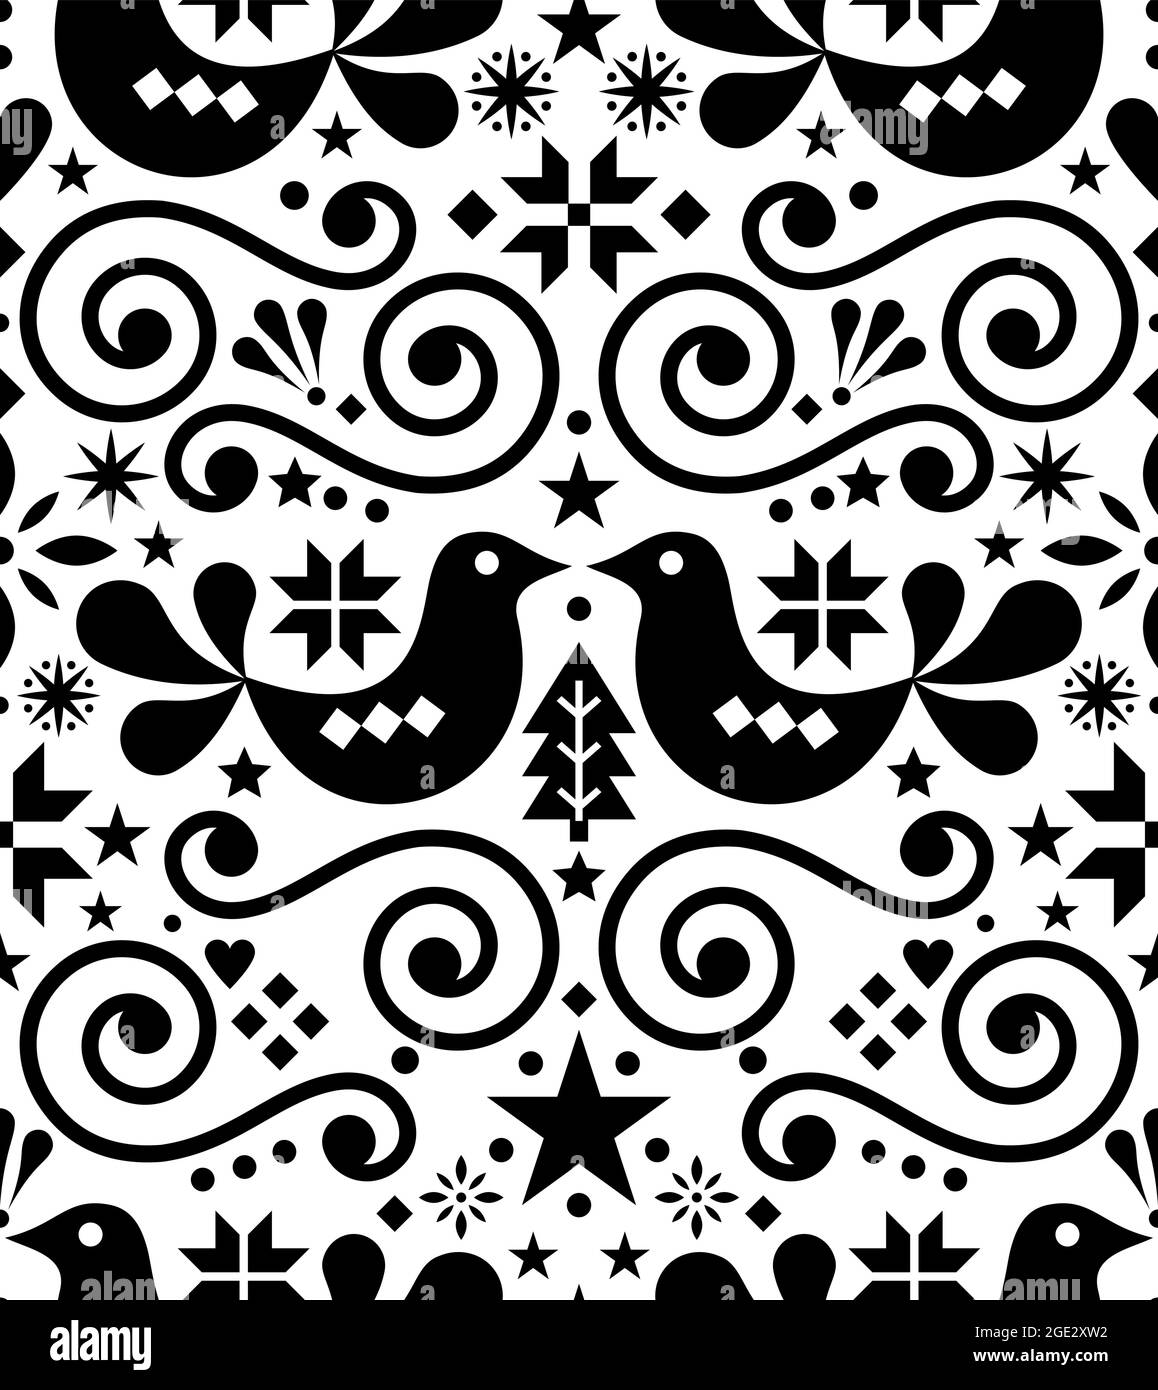 Scandinavian Christmas seamless folk vector textile pattern with birds in black and white, snowflakes, hearts and Christmas trees Stock Vector